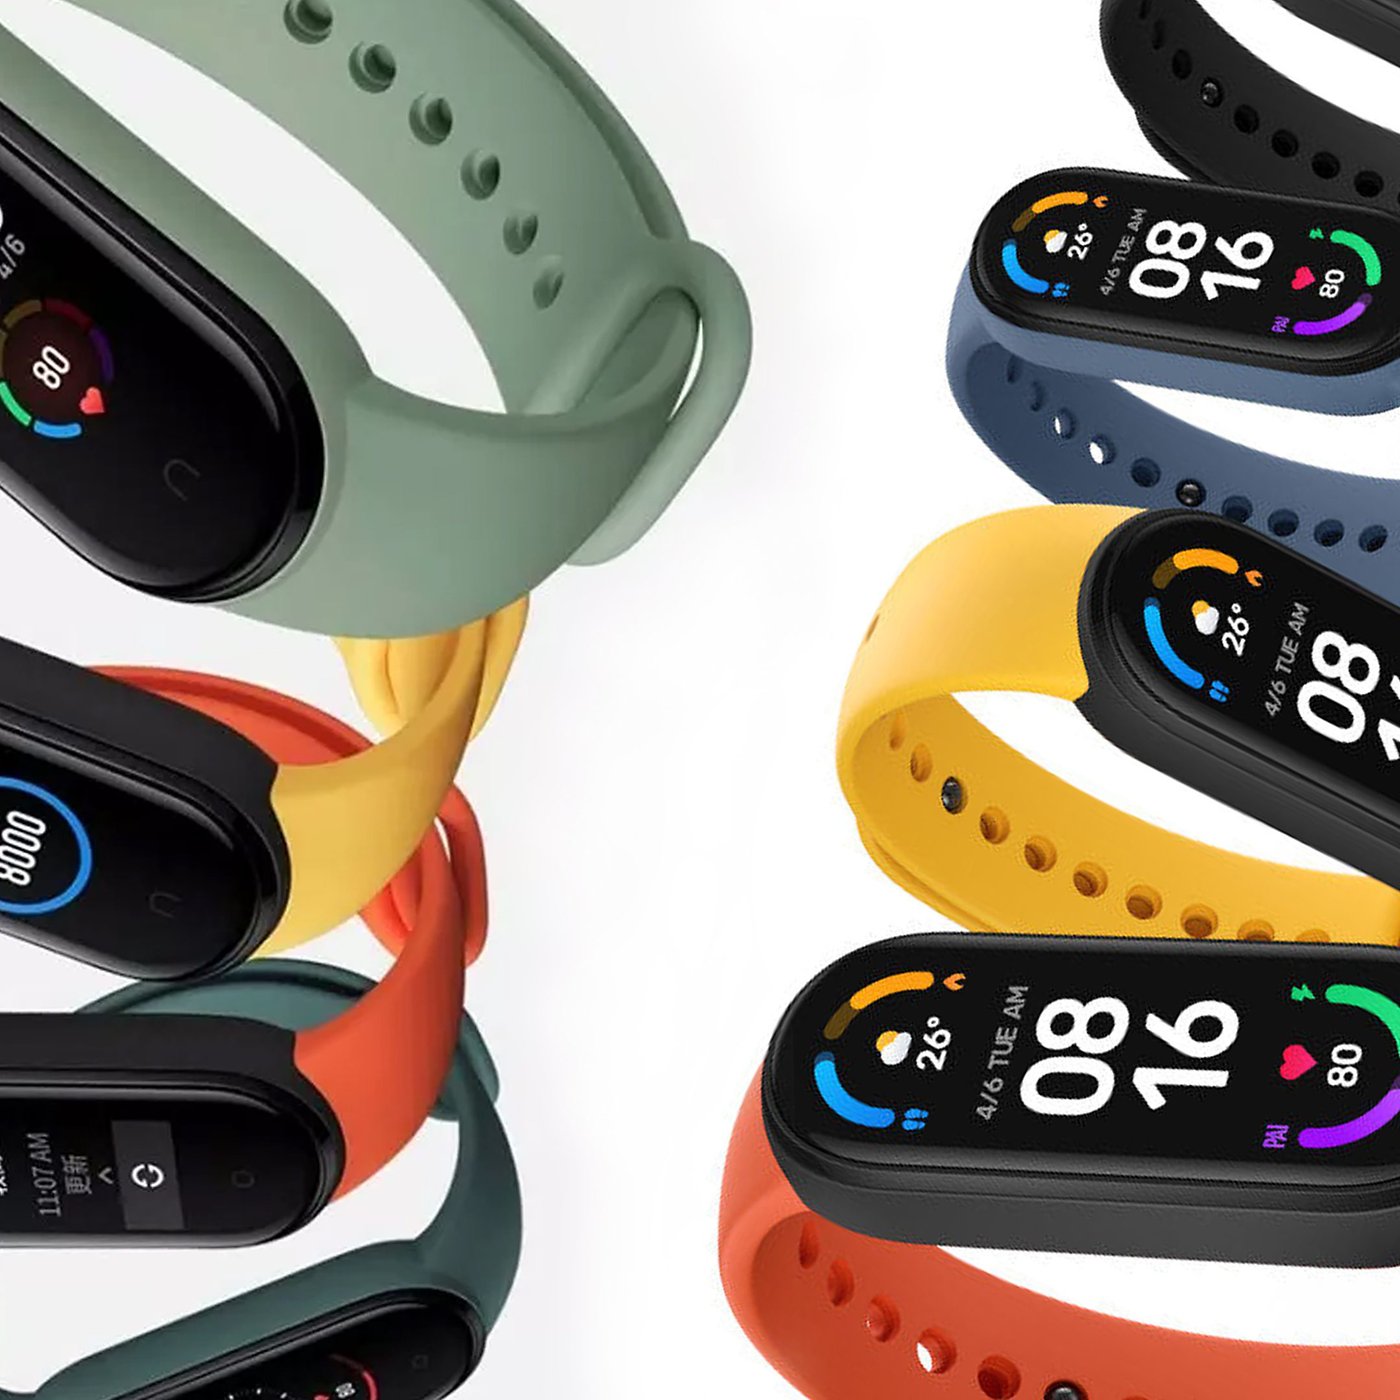 Xiaomi Mi Band 6 v Mi Band 5: the key differences - Wareable